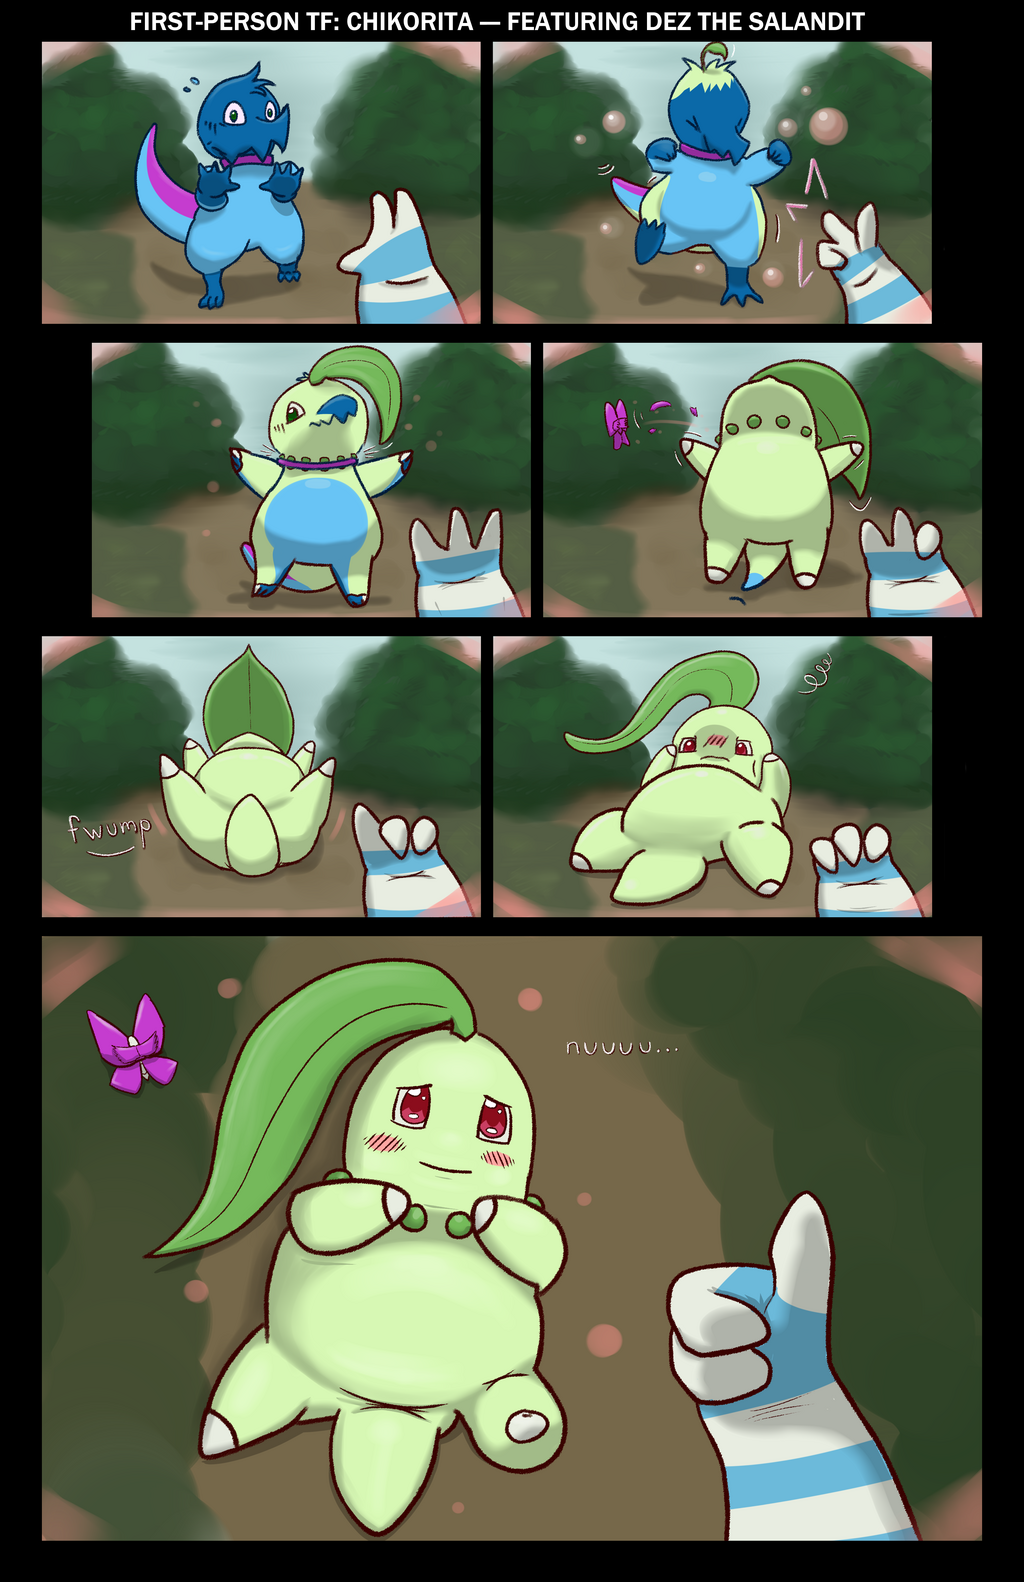 First-Person Perspective Transformation: Chikorita